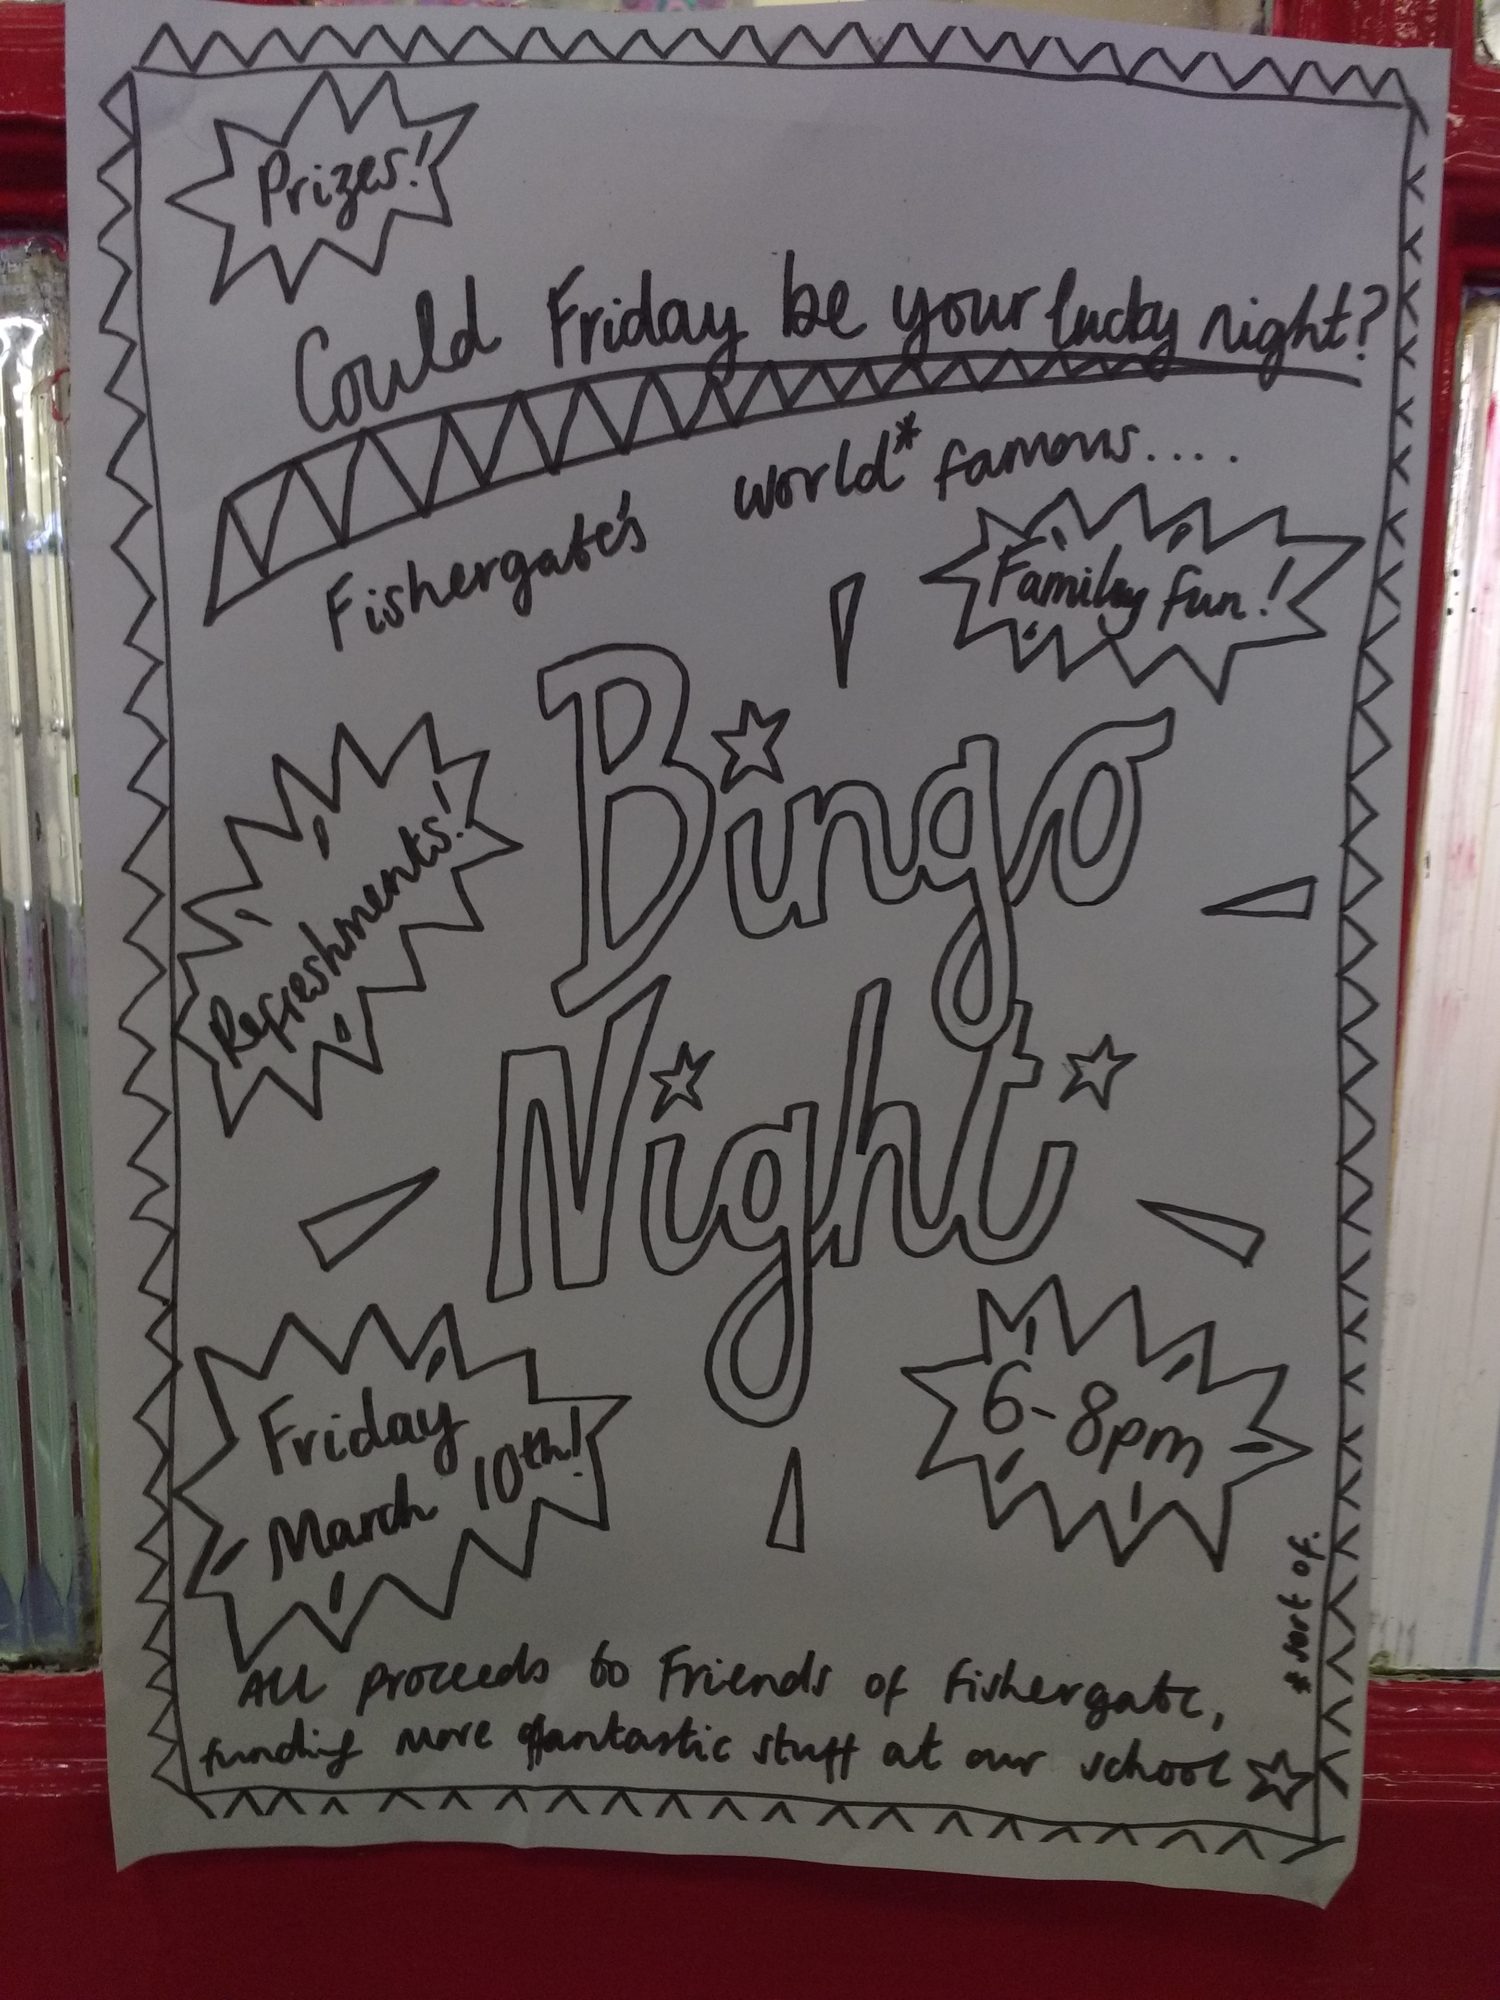 Bingo Night, 6pm to 8pm on Friday March 10th